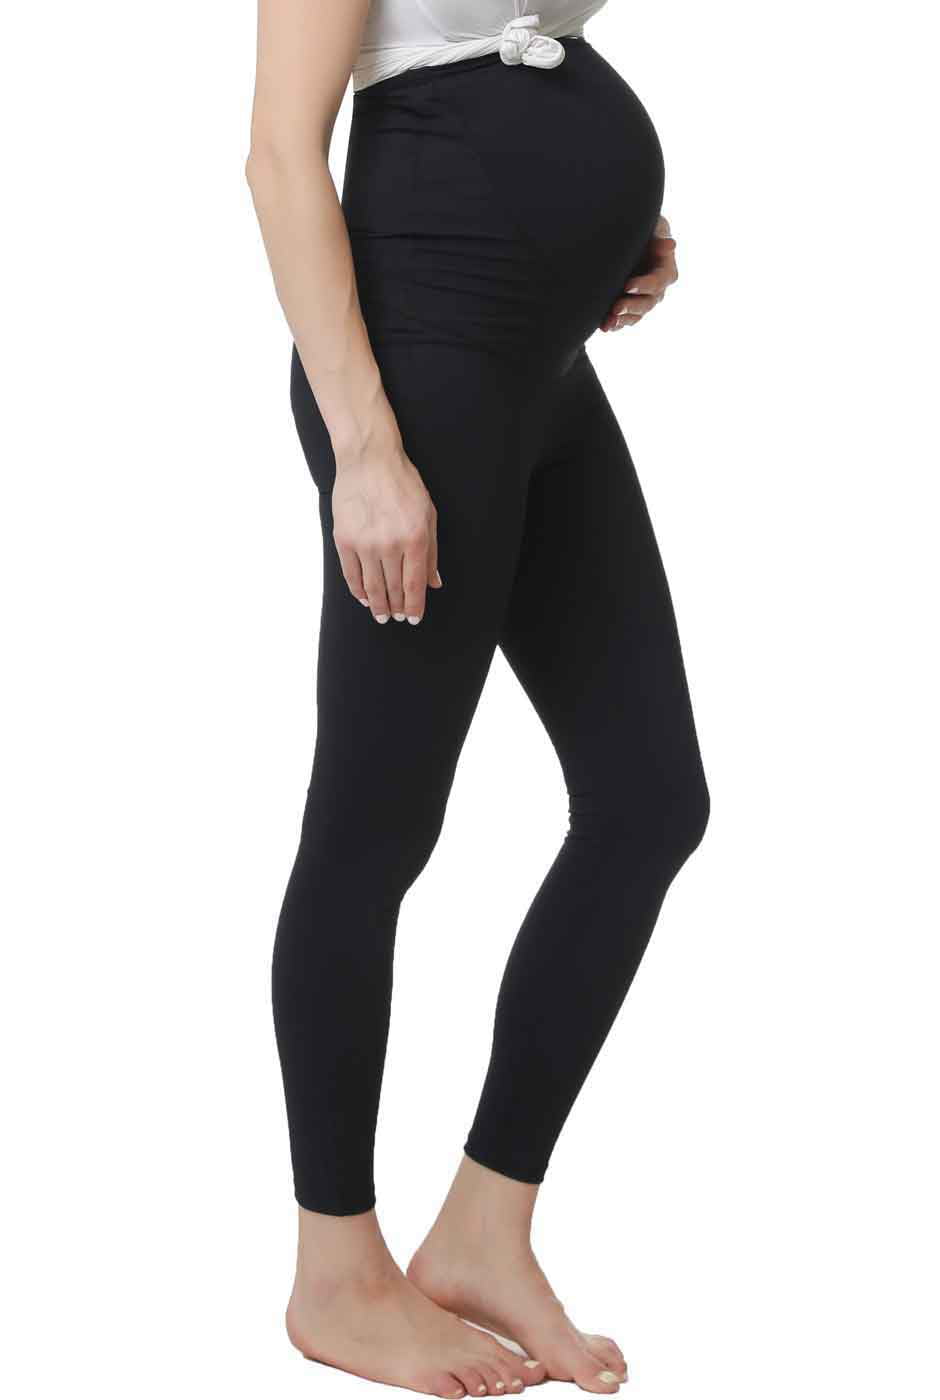 30 Minute Denim Workout Leggings with Comfort Workout Clothes